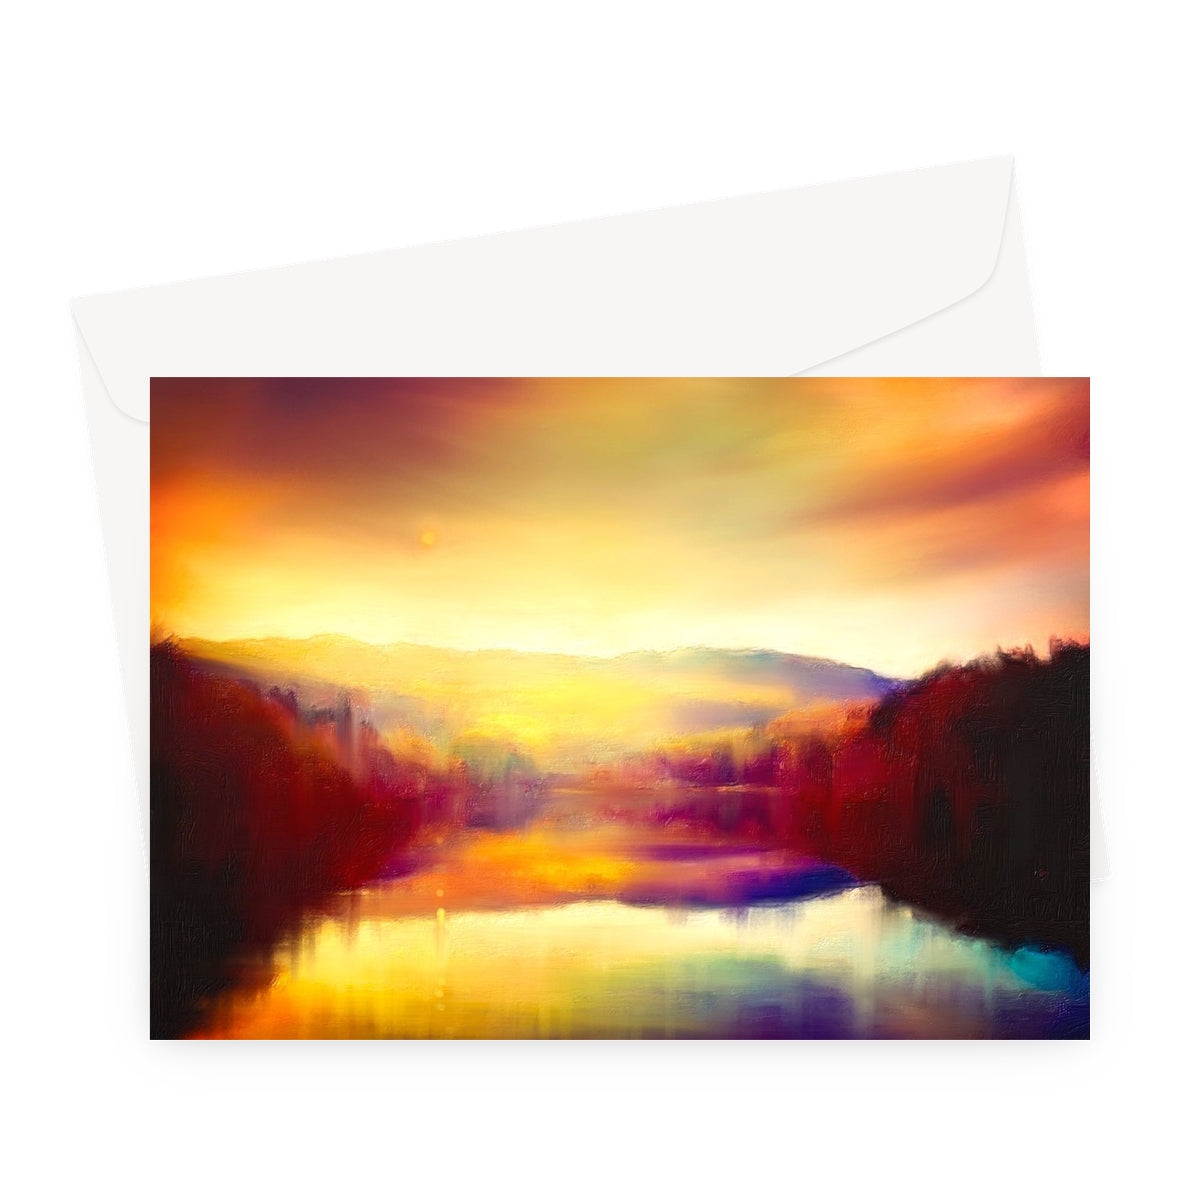 Loch Faskally Dusk Art Gifts Greeting Card-Stationery-Scottish Lochs & Mountains Art Gallery-A5 Landscape-1 Card-Paintings, Prints, Homeware, Art Gifts From Scotland By Scottish Artist Kevin Hunter